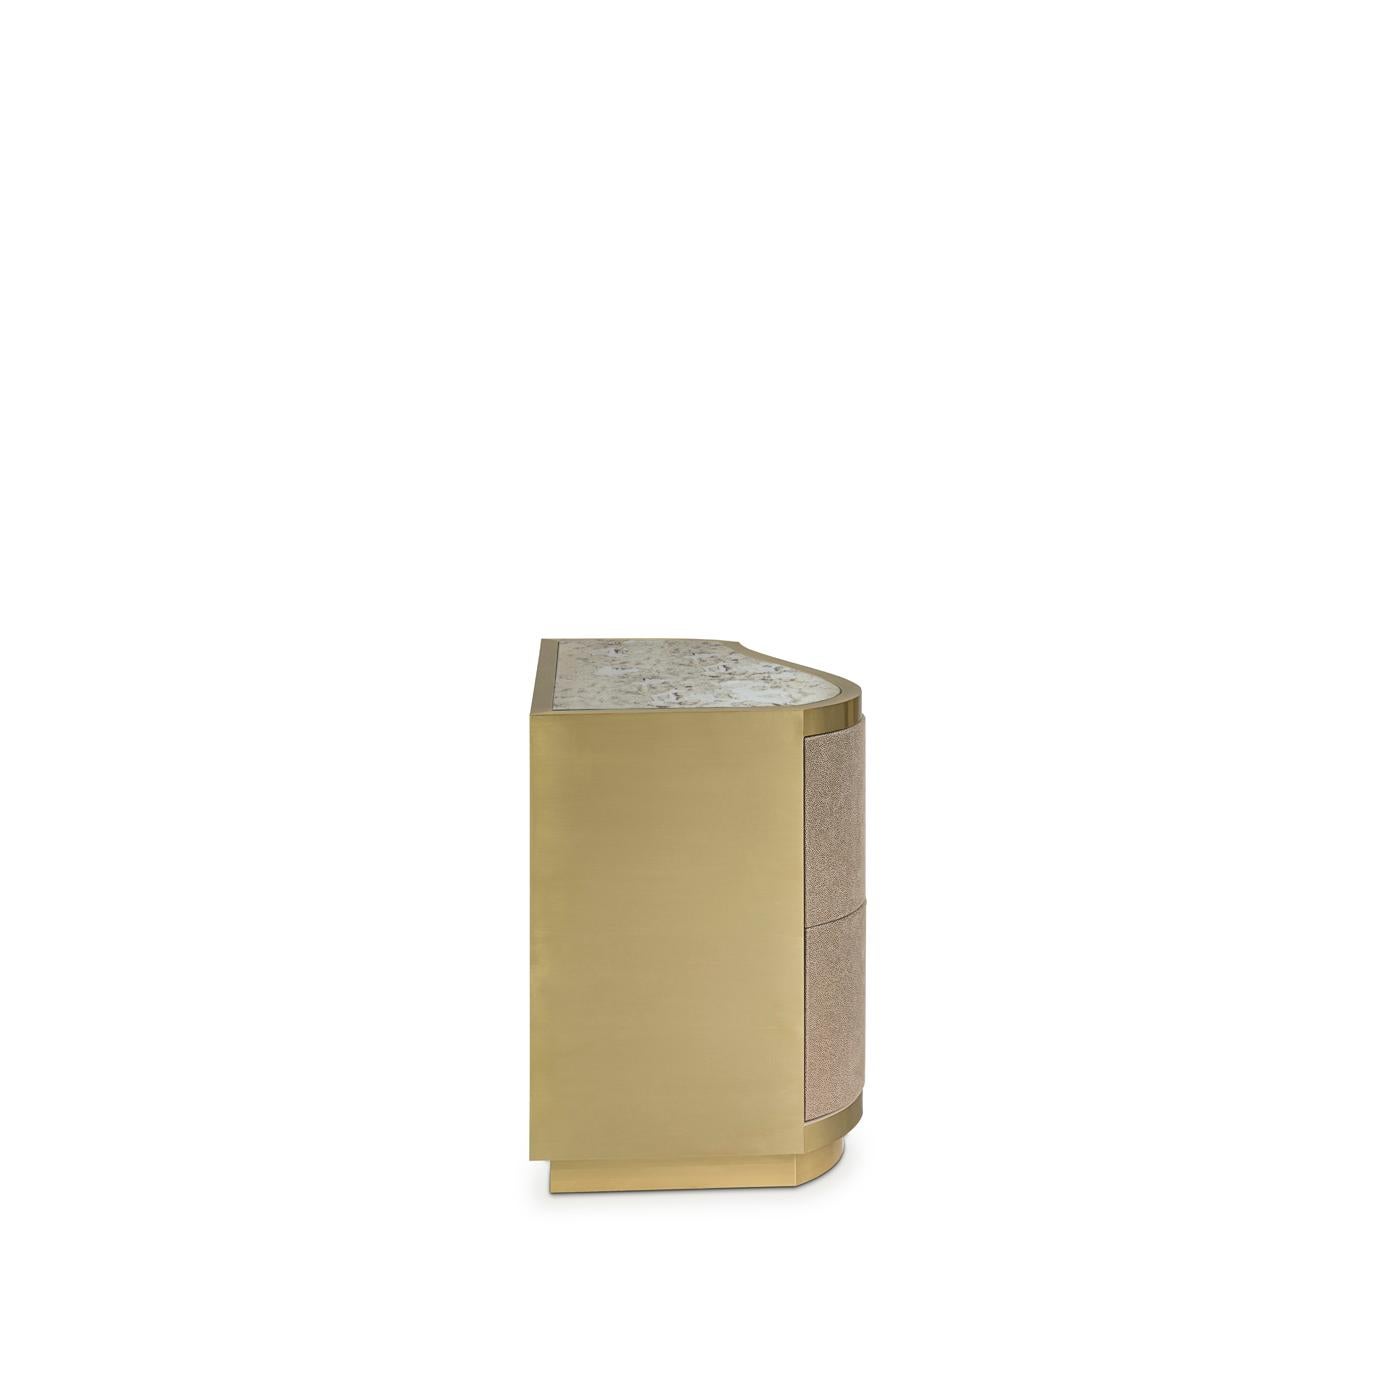 The delicate undulating front of the Poem nightstand and its leather upholstered body framed by metal bands exudes modern vintage glamour. The top of this stunning nightstand is finished with a sheet of glass to protect the leather.